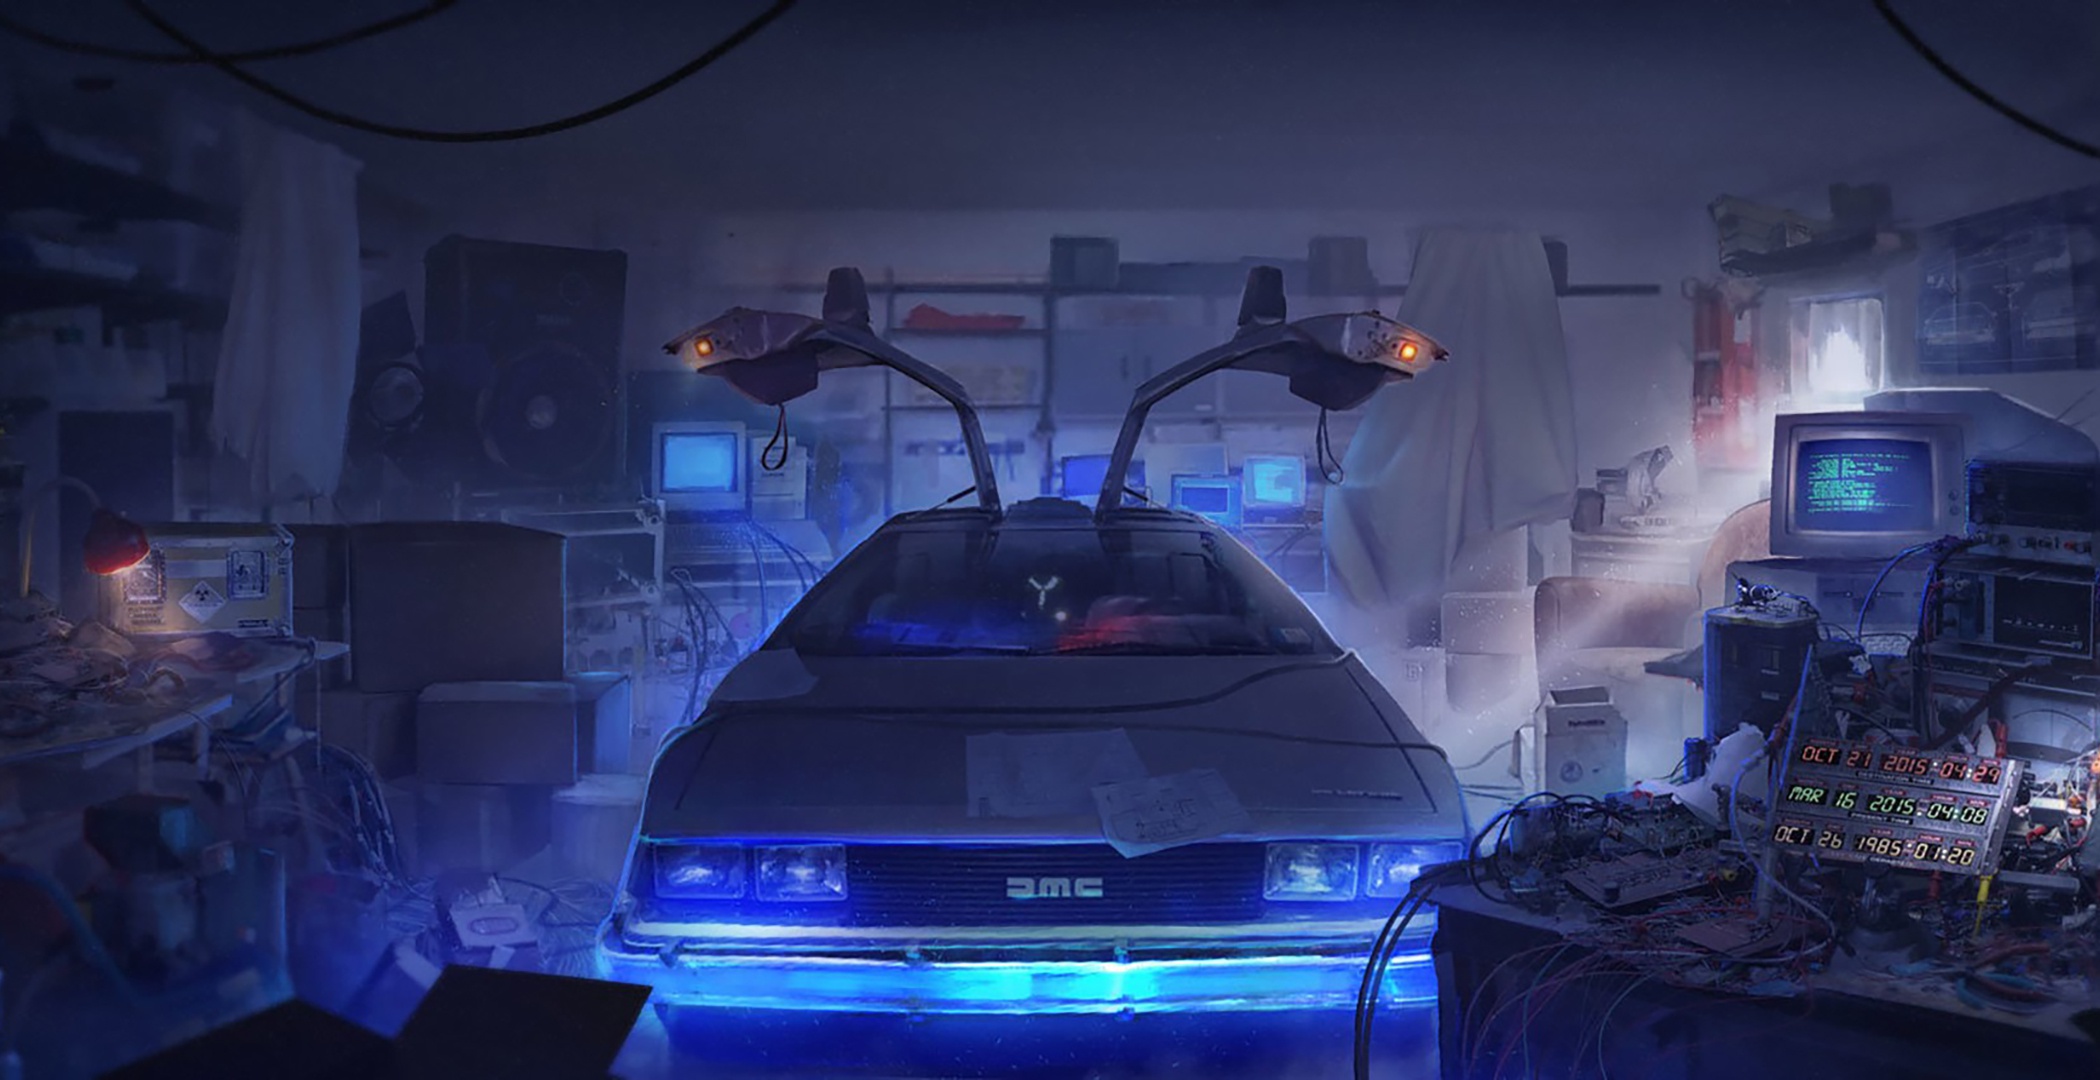 DeLorean Dark Movies Back To The Future Car Time Machine Vehicle Artwork Movie Vehicles Frontal View 2100x1080